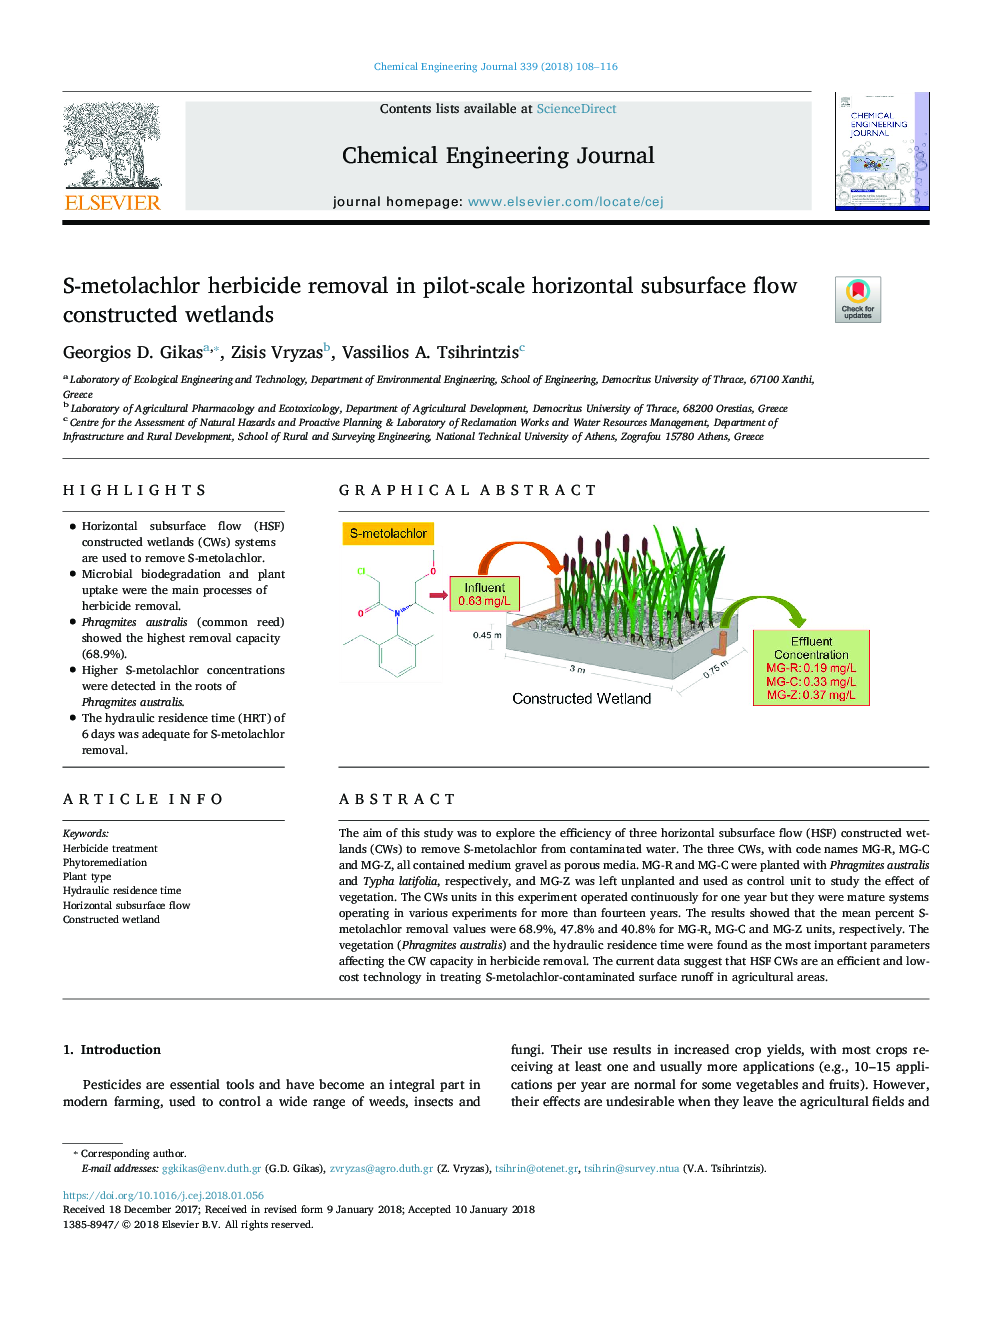 S-metolachlor herbicide removal in pilot-scale horizontal subsurface flow constructed wetlands